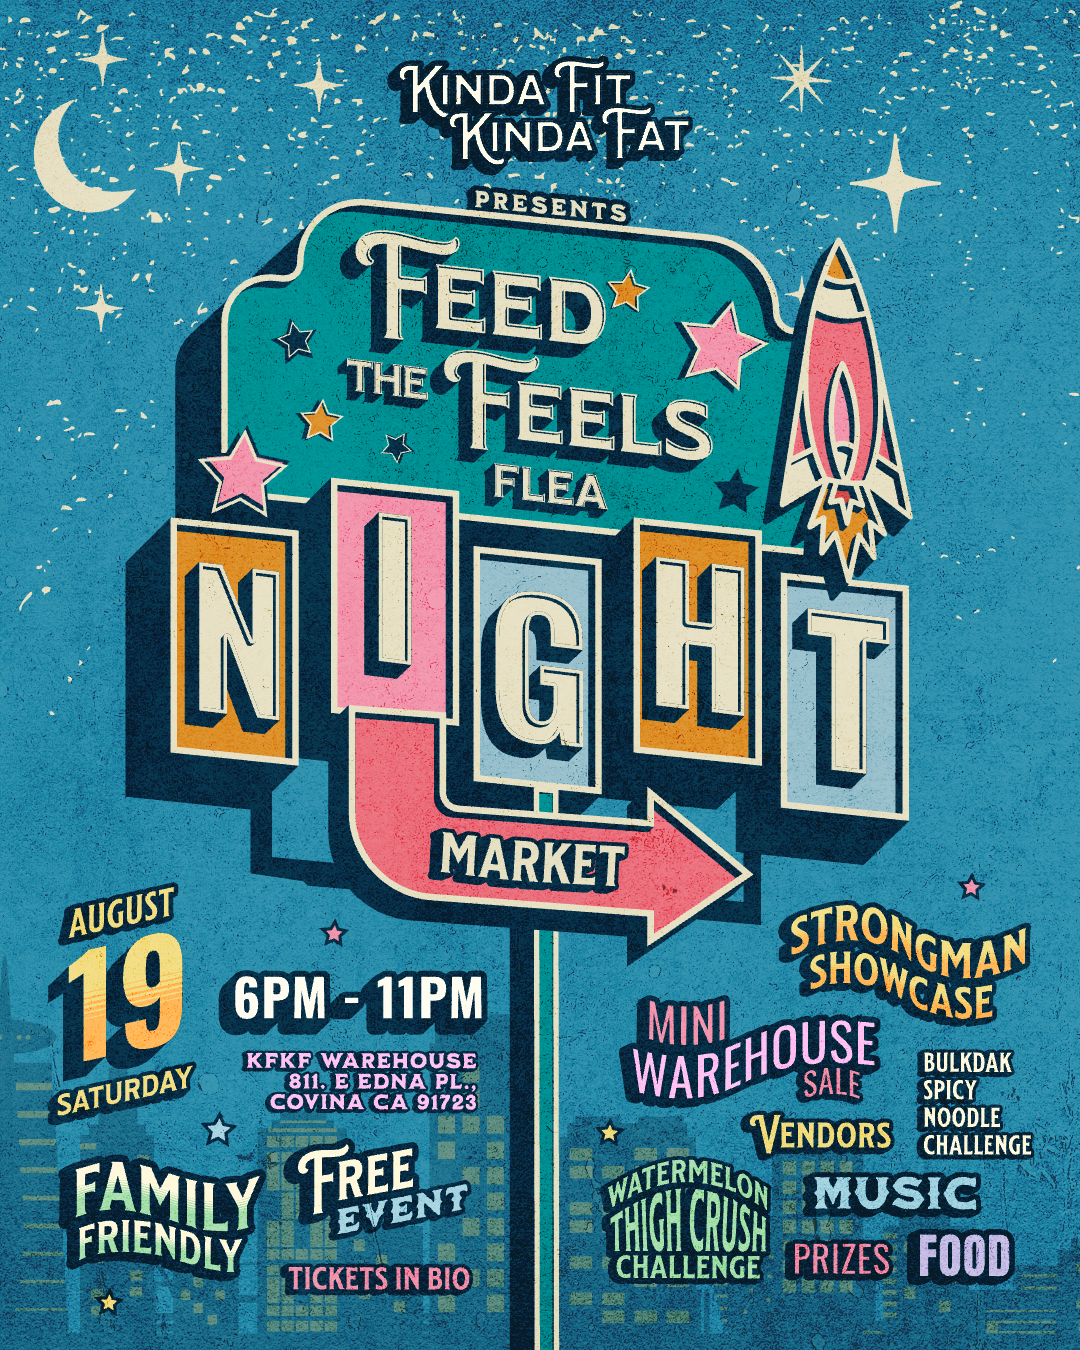 Our first Feed the Feels Flea Night Market Extravaganza! (SOLD OUT EVENT!)